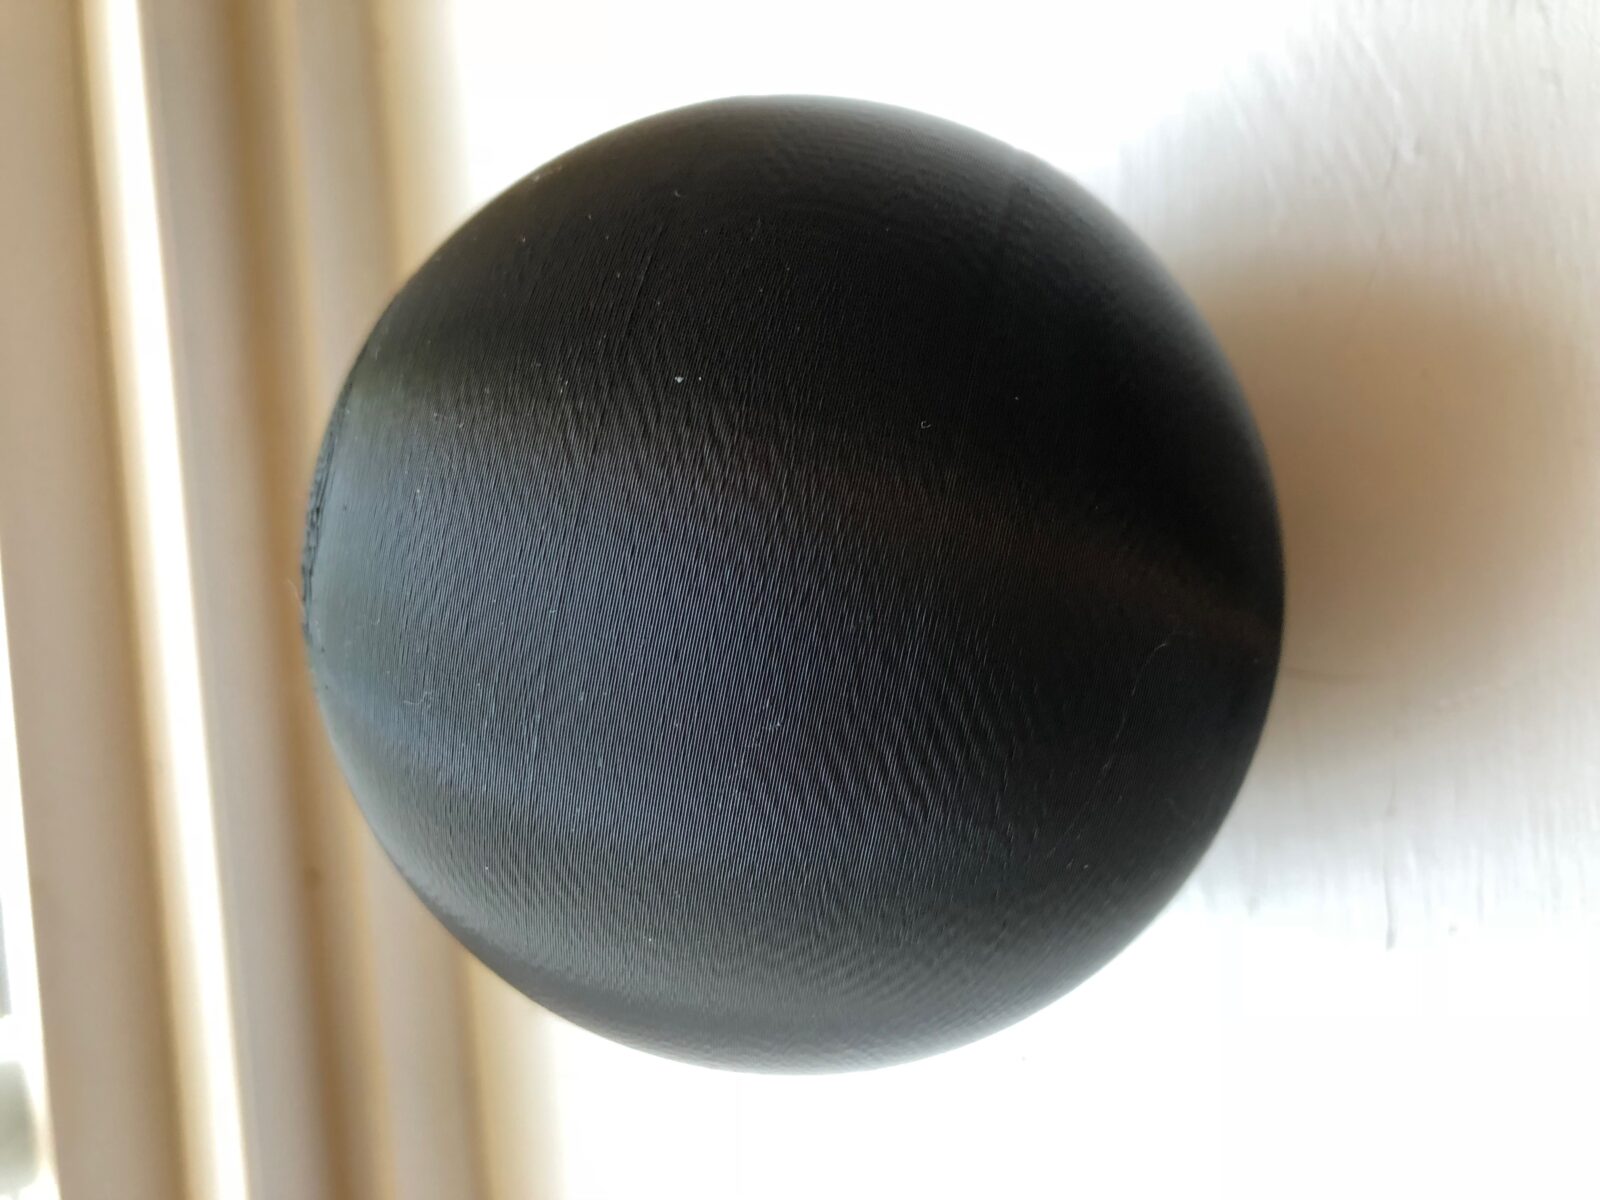 How to 3D print a hollow ball